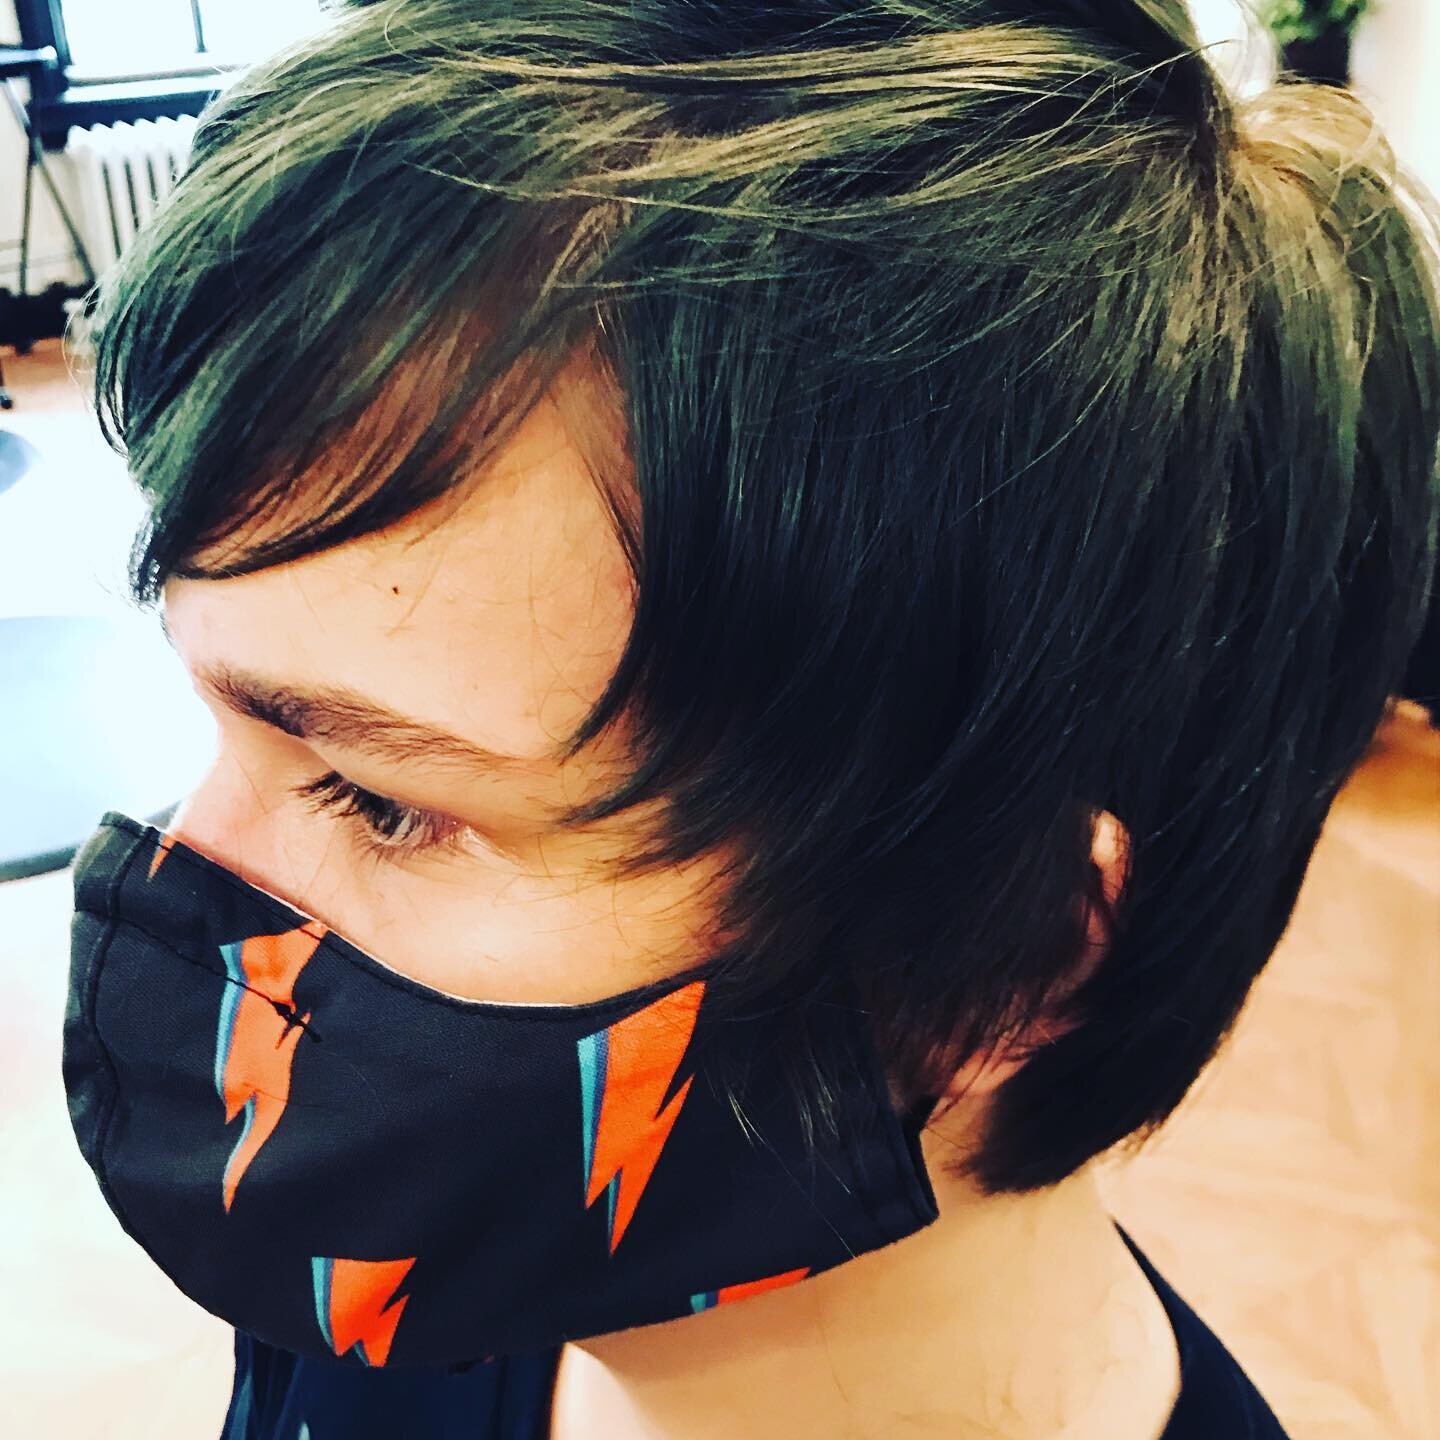 Razor cut and the awesome Gareth! @essam_chalf Chopped off years old of length into this short razored pixie.
.
.
.
#shorthair #pixiecut #razorcuts #texture #makeover #georgetownmainstreet #georgetownsalon #georgetownstylist #dcstylist @drusilla_grey